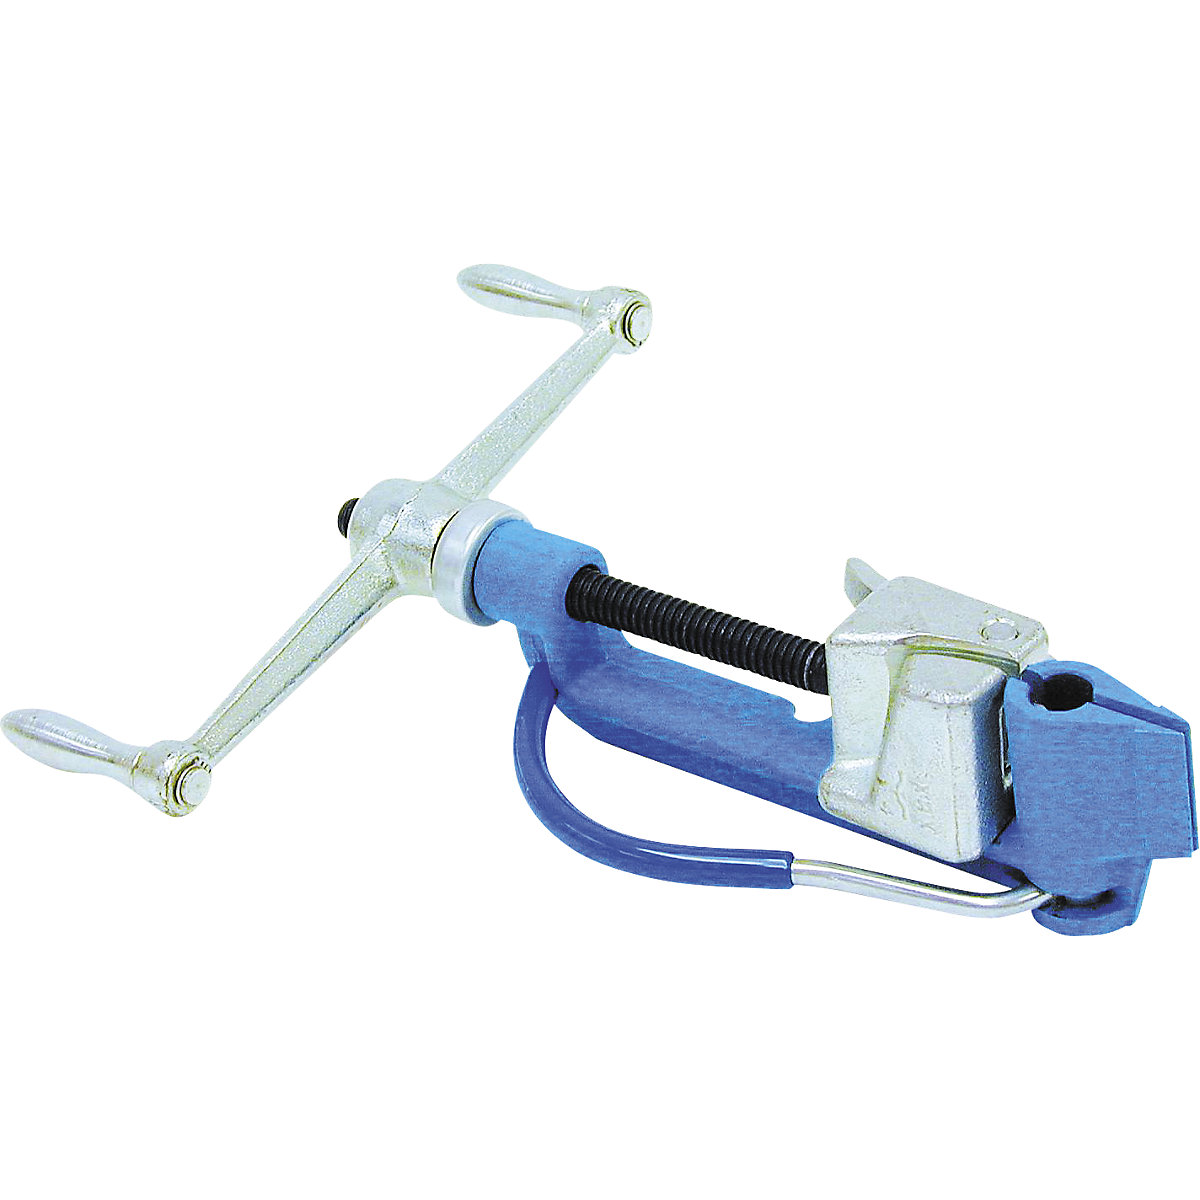 Tensioning tool for stainless steel straps